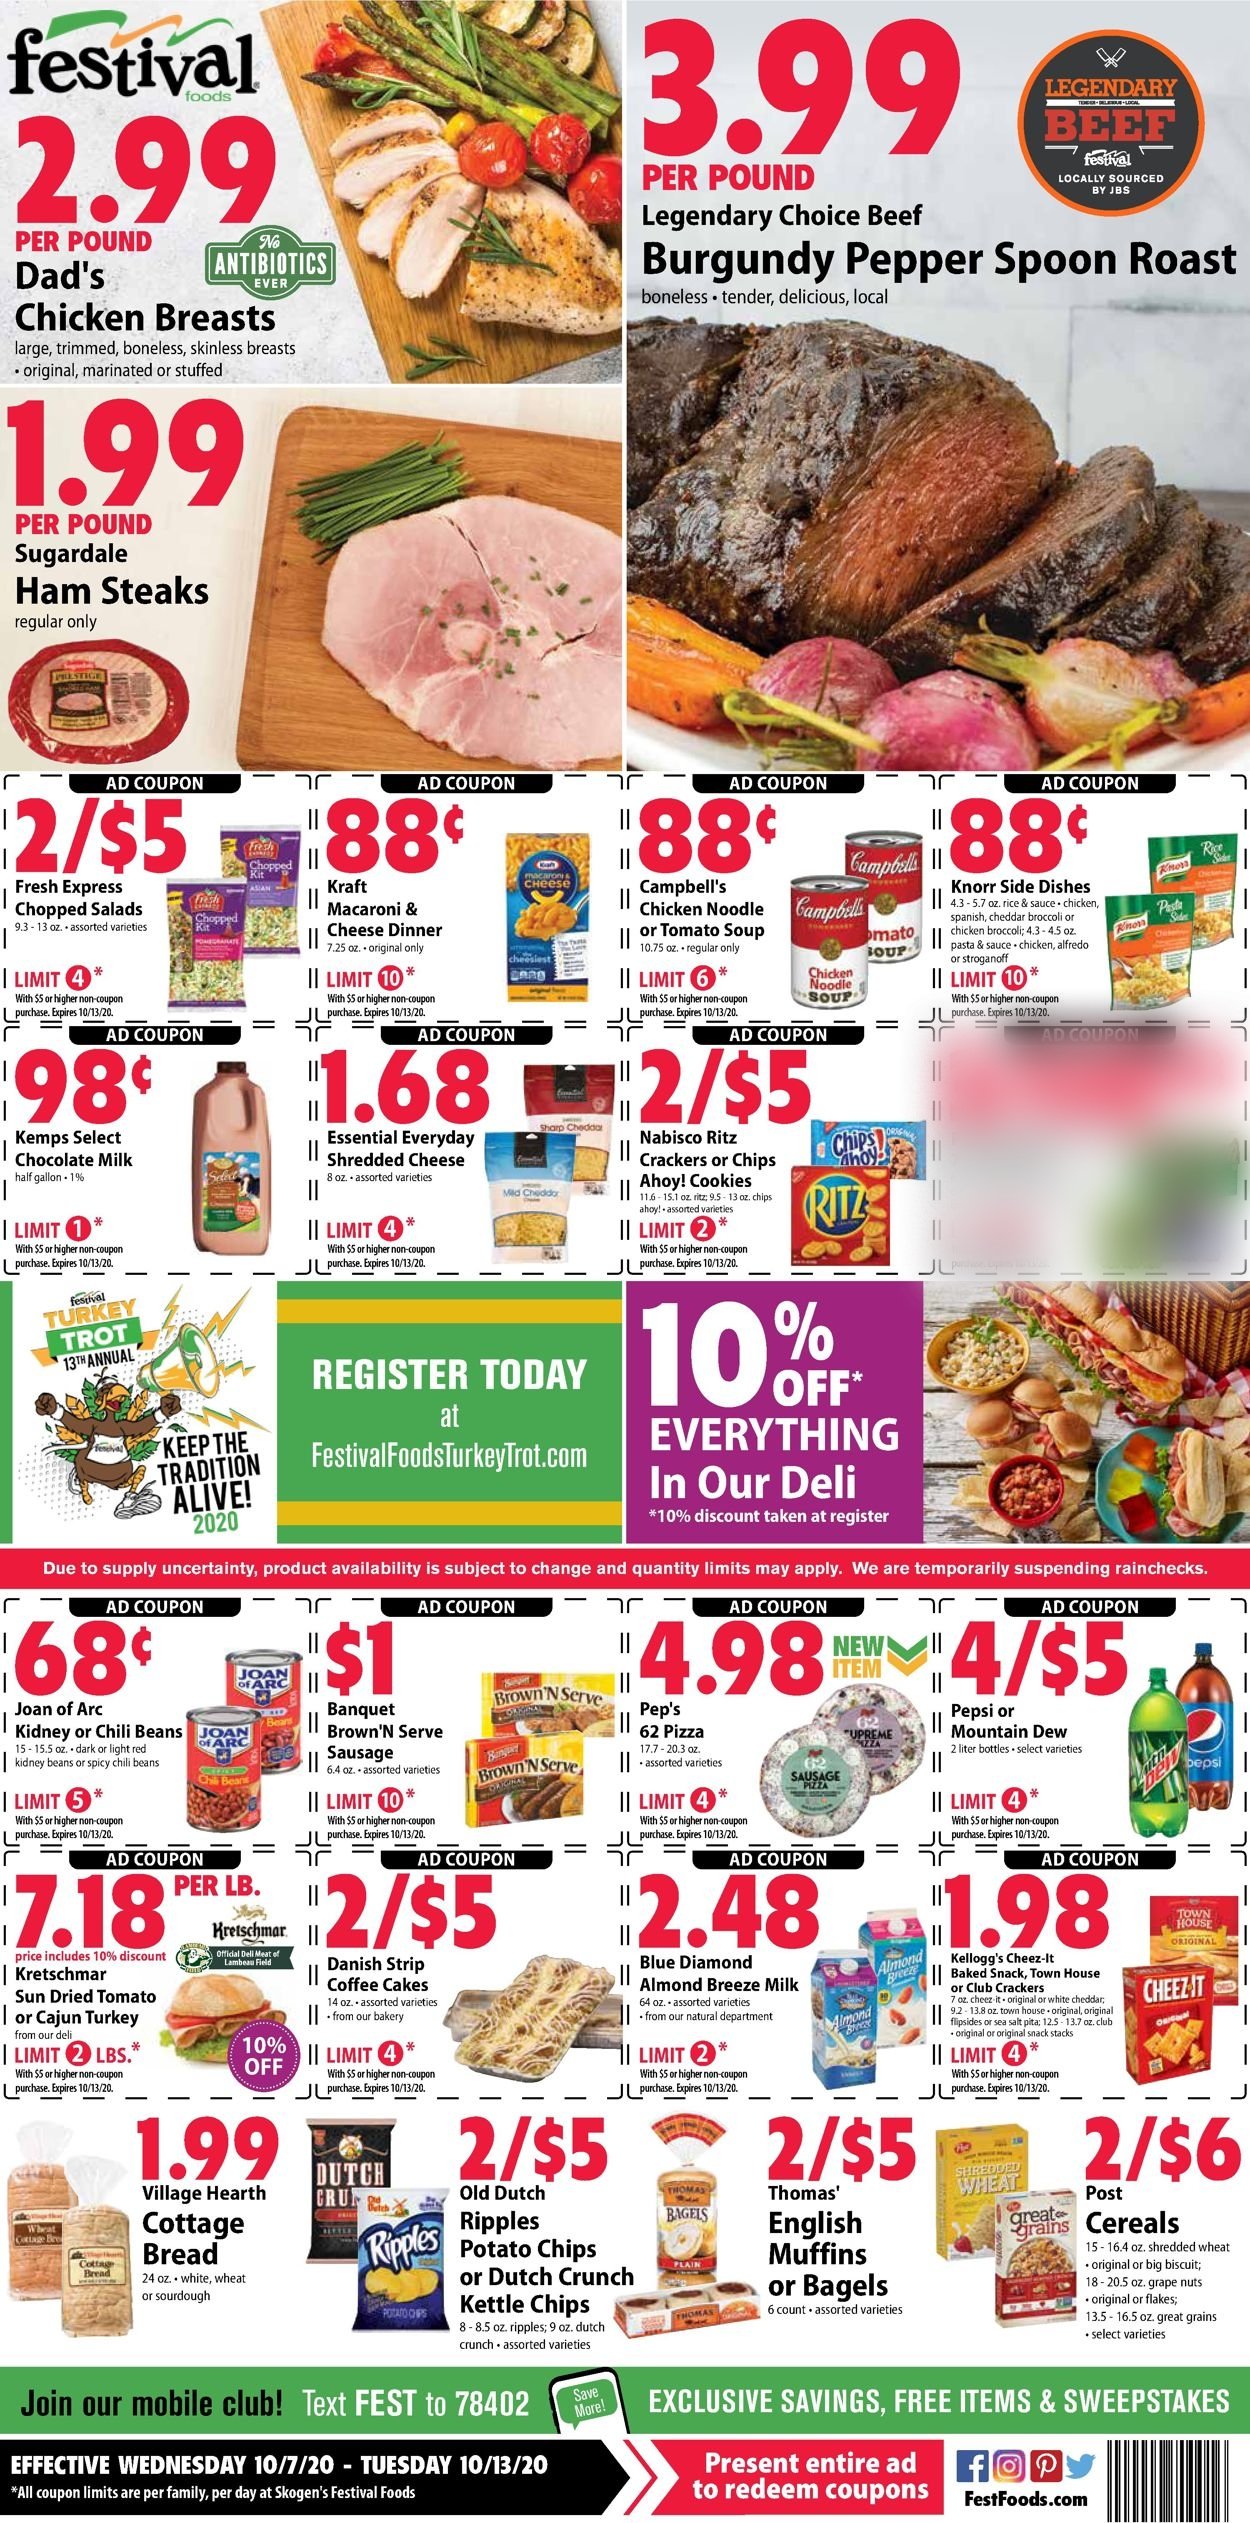 Festival Foods Current weekly ad 09/30 - 10/13/2020 - frequent-ads.com